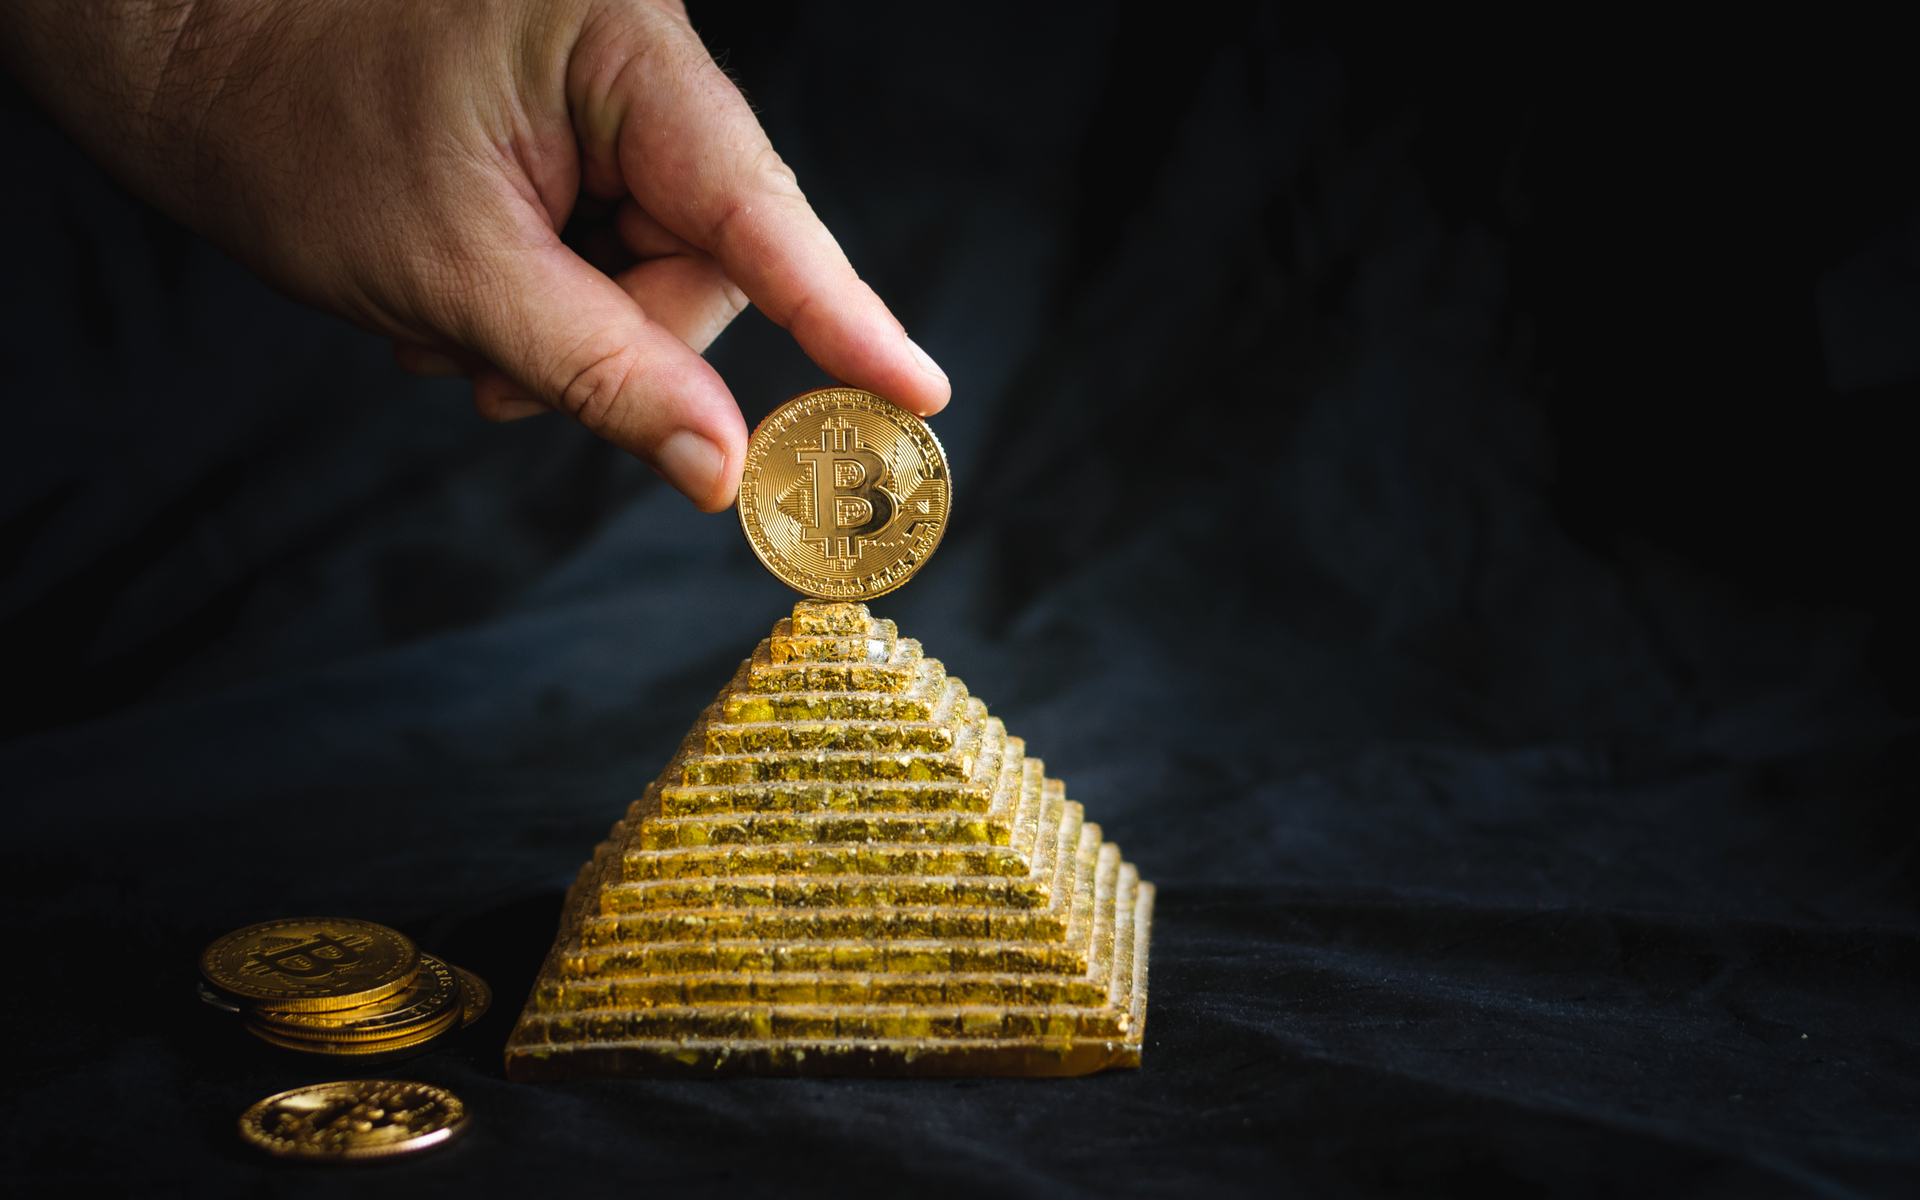 Only Bitcoin Gets to Be a ‘Legal Pyramid Scheme’ Like Gold, Says Mike Novogratz